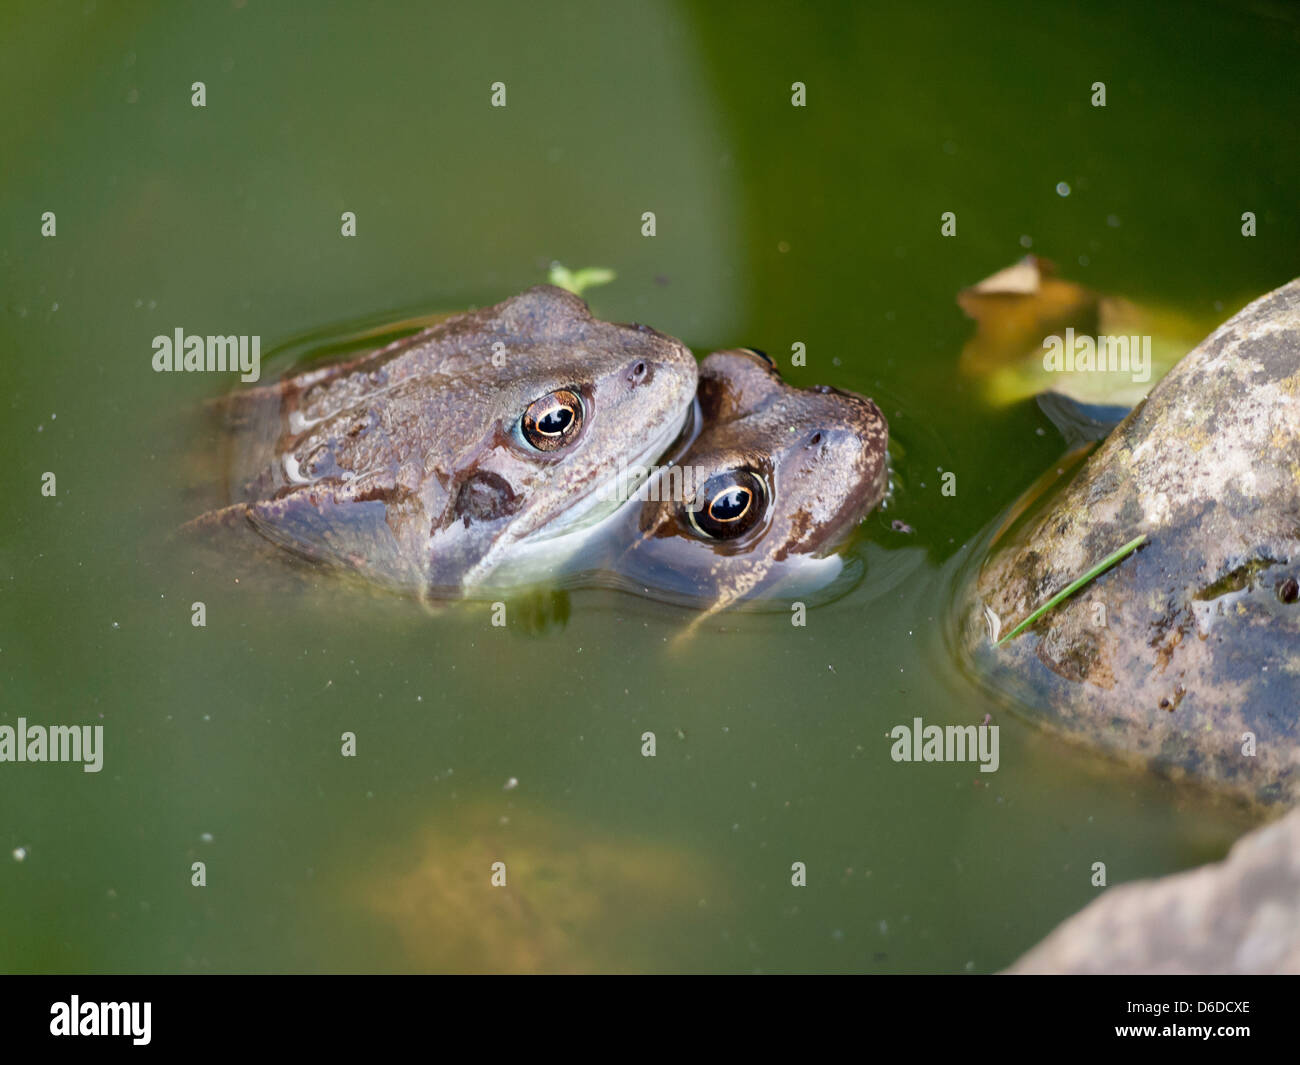 Mating Common Frogs 'Rana temporaria' in a garden pond. Stock Photo